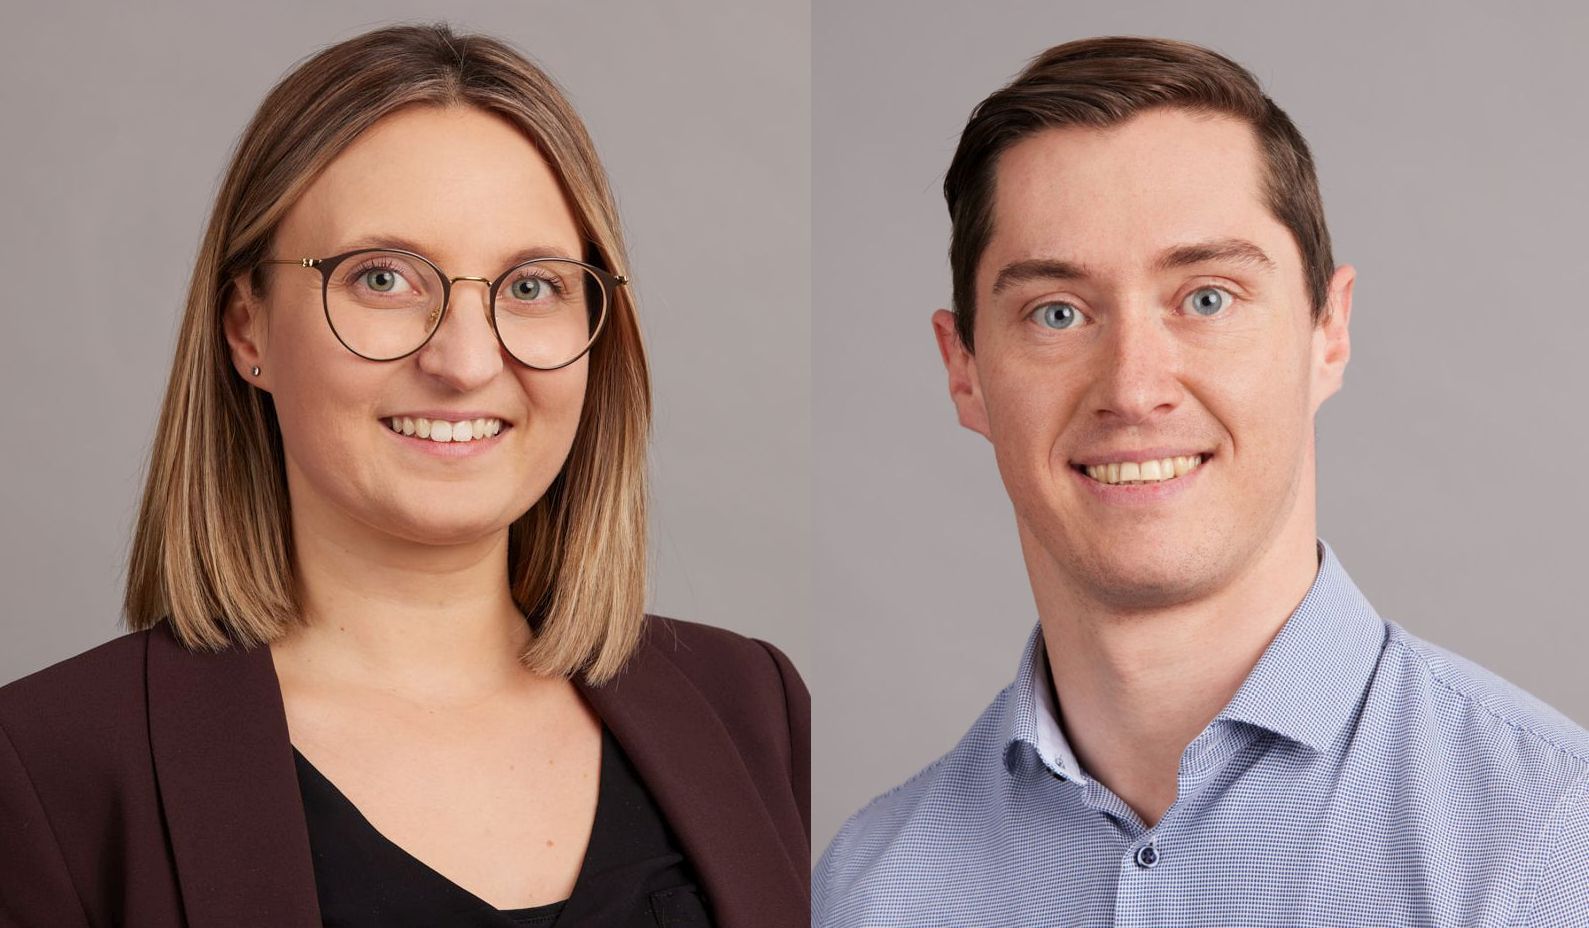 Nadine Keitel and Patrick Klein are new employee managers at Tietoevry Austria